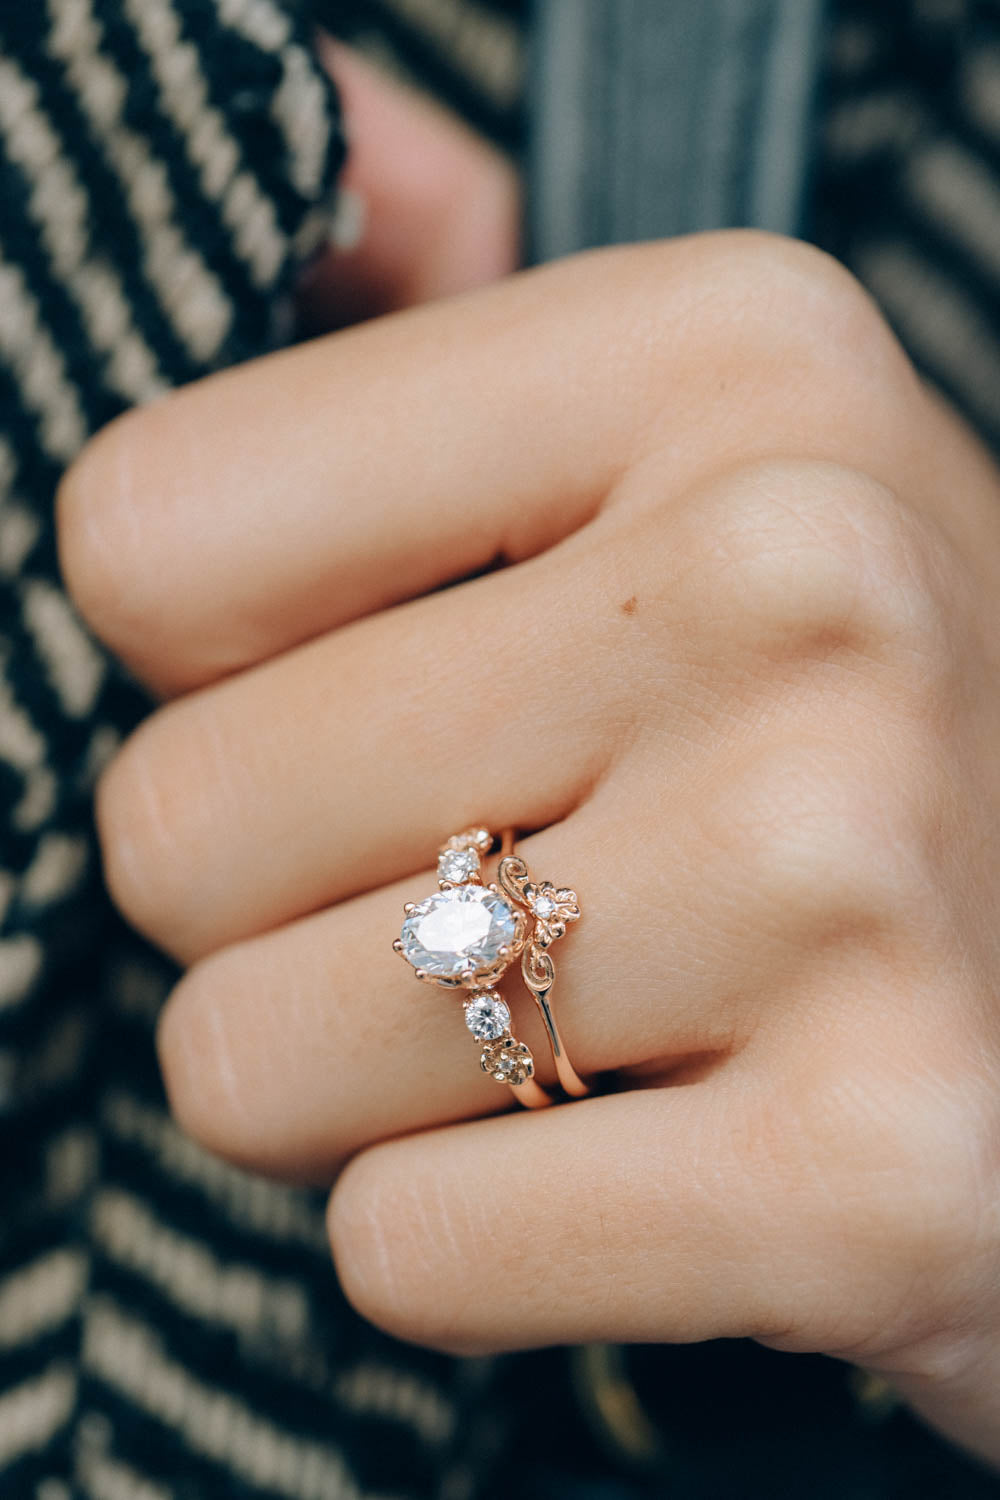 Ethical lab grown diamond engagement ring, rose gold flower promise ring  with diamonds / Fiorella